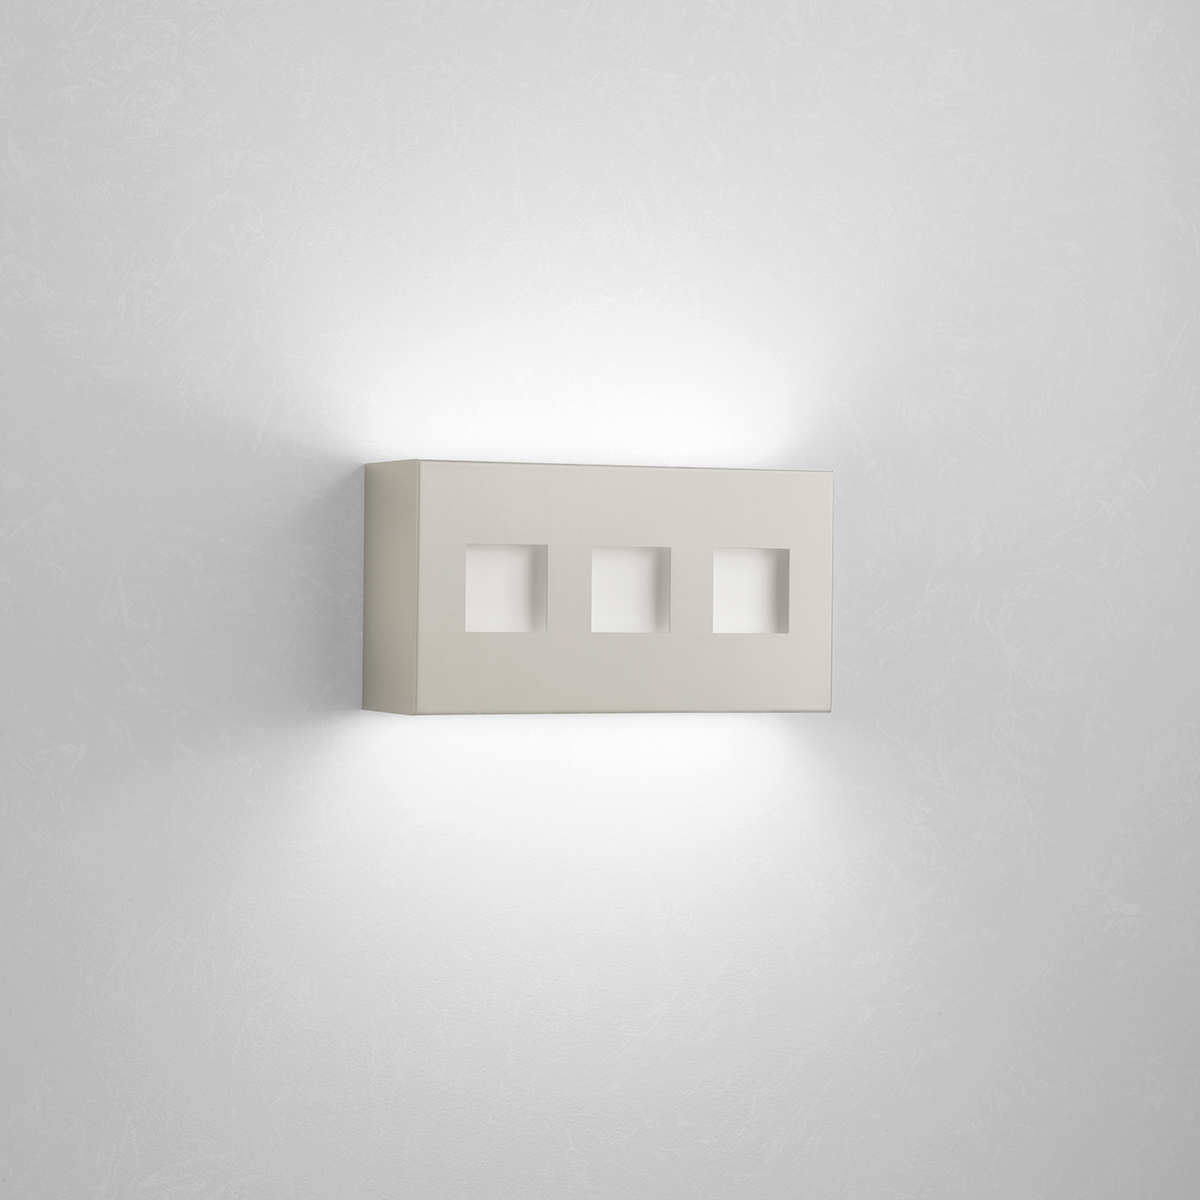 Linear Art Sconce with decorative windows